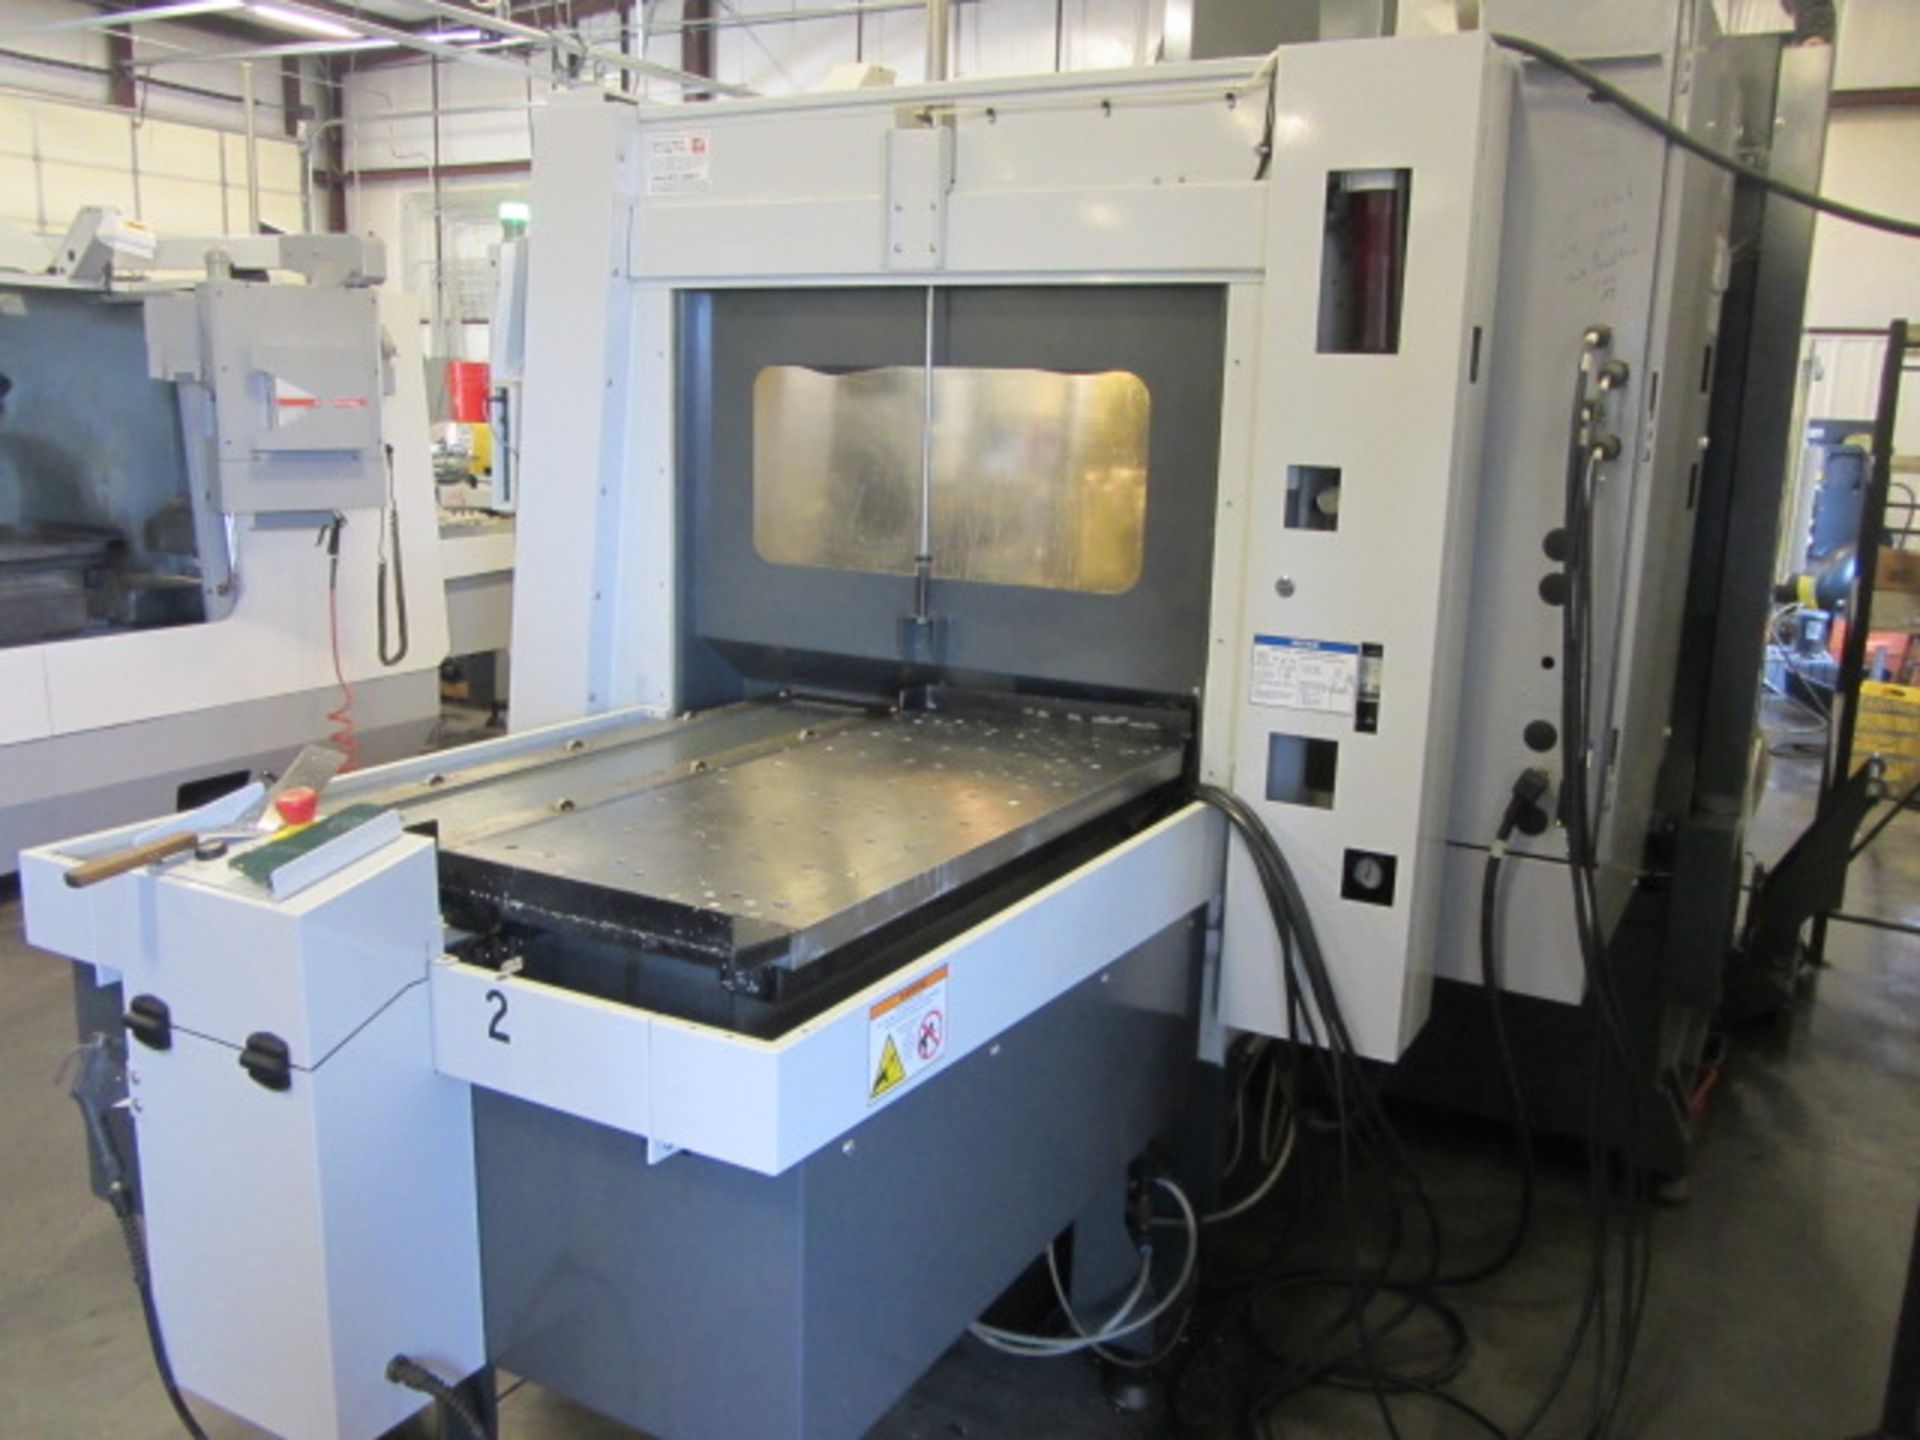 Haas VF3DAPC 5-Axis CNC Vertical Machining Center with Dual Pallet Changer, Intuitive Probing, - Image 5 of 11